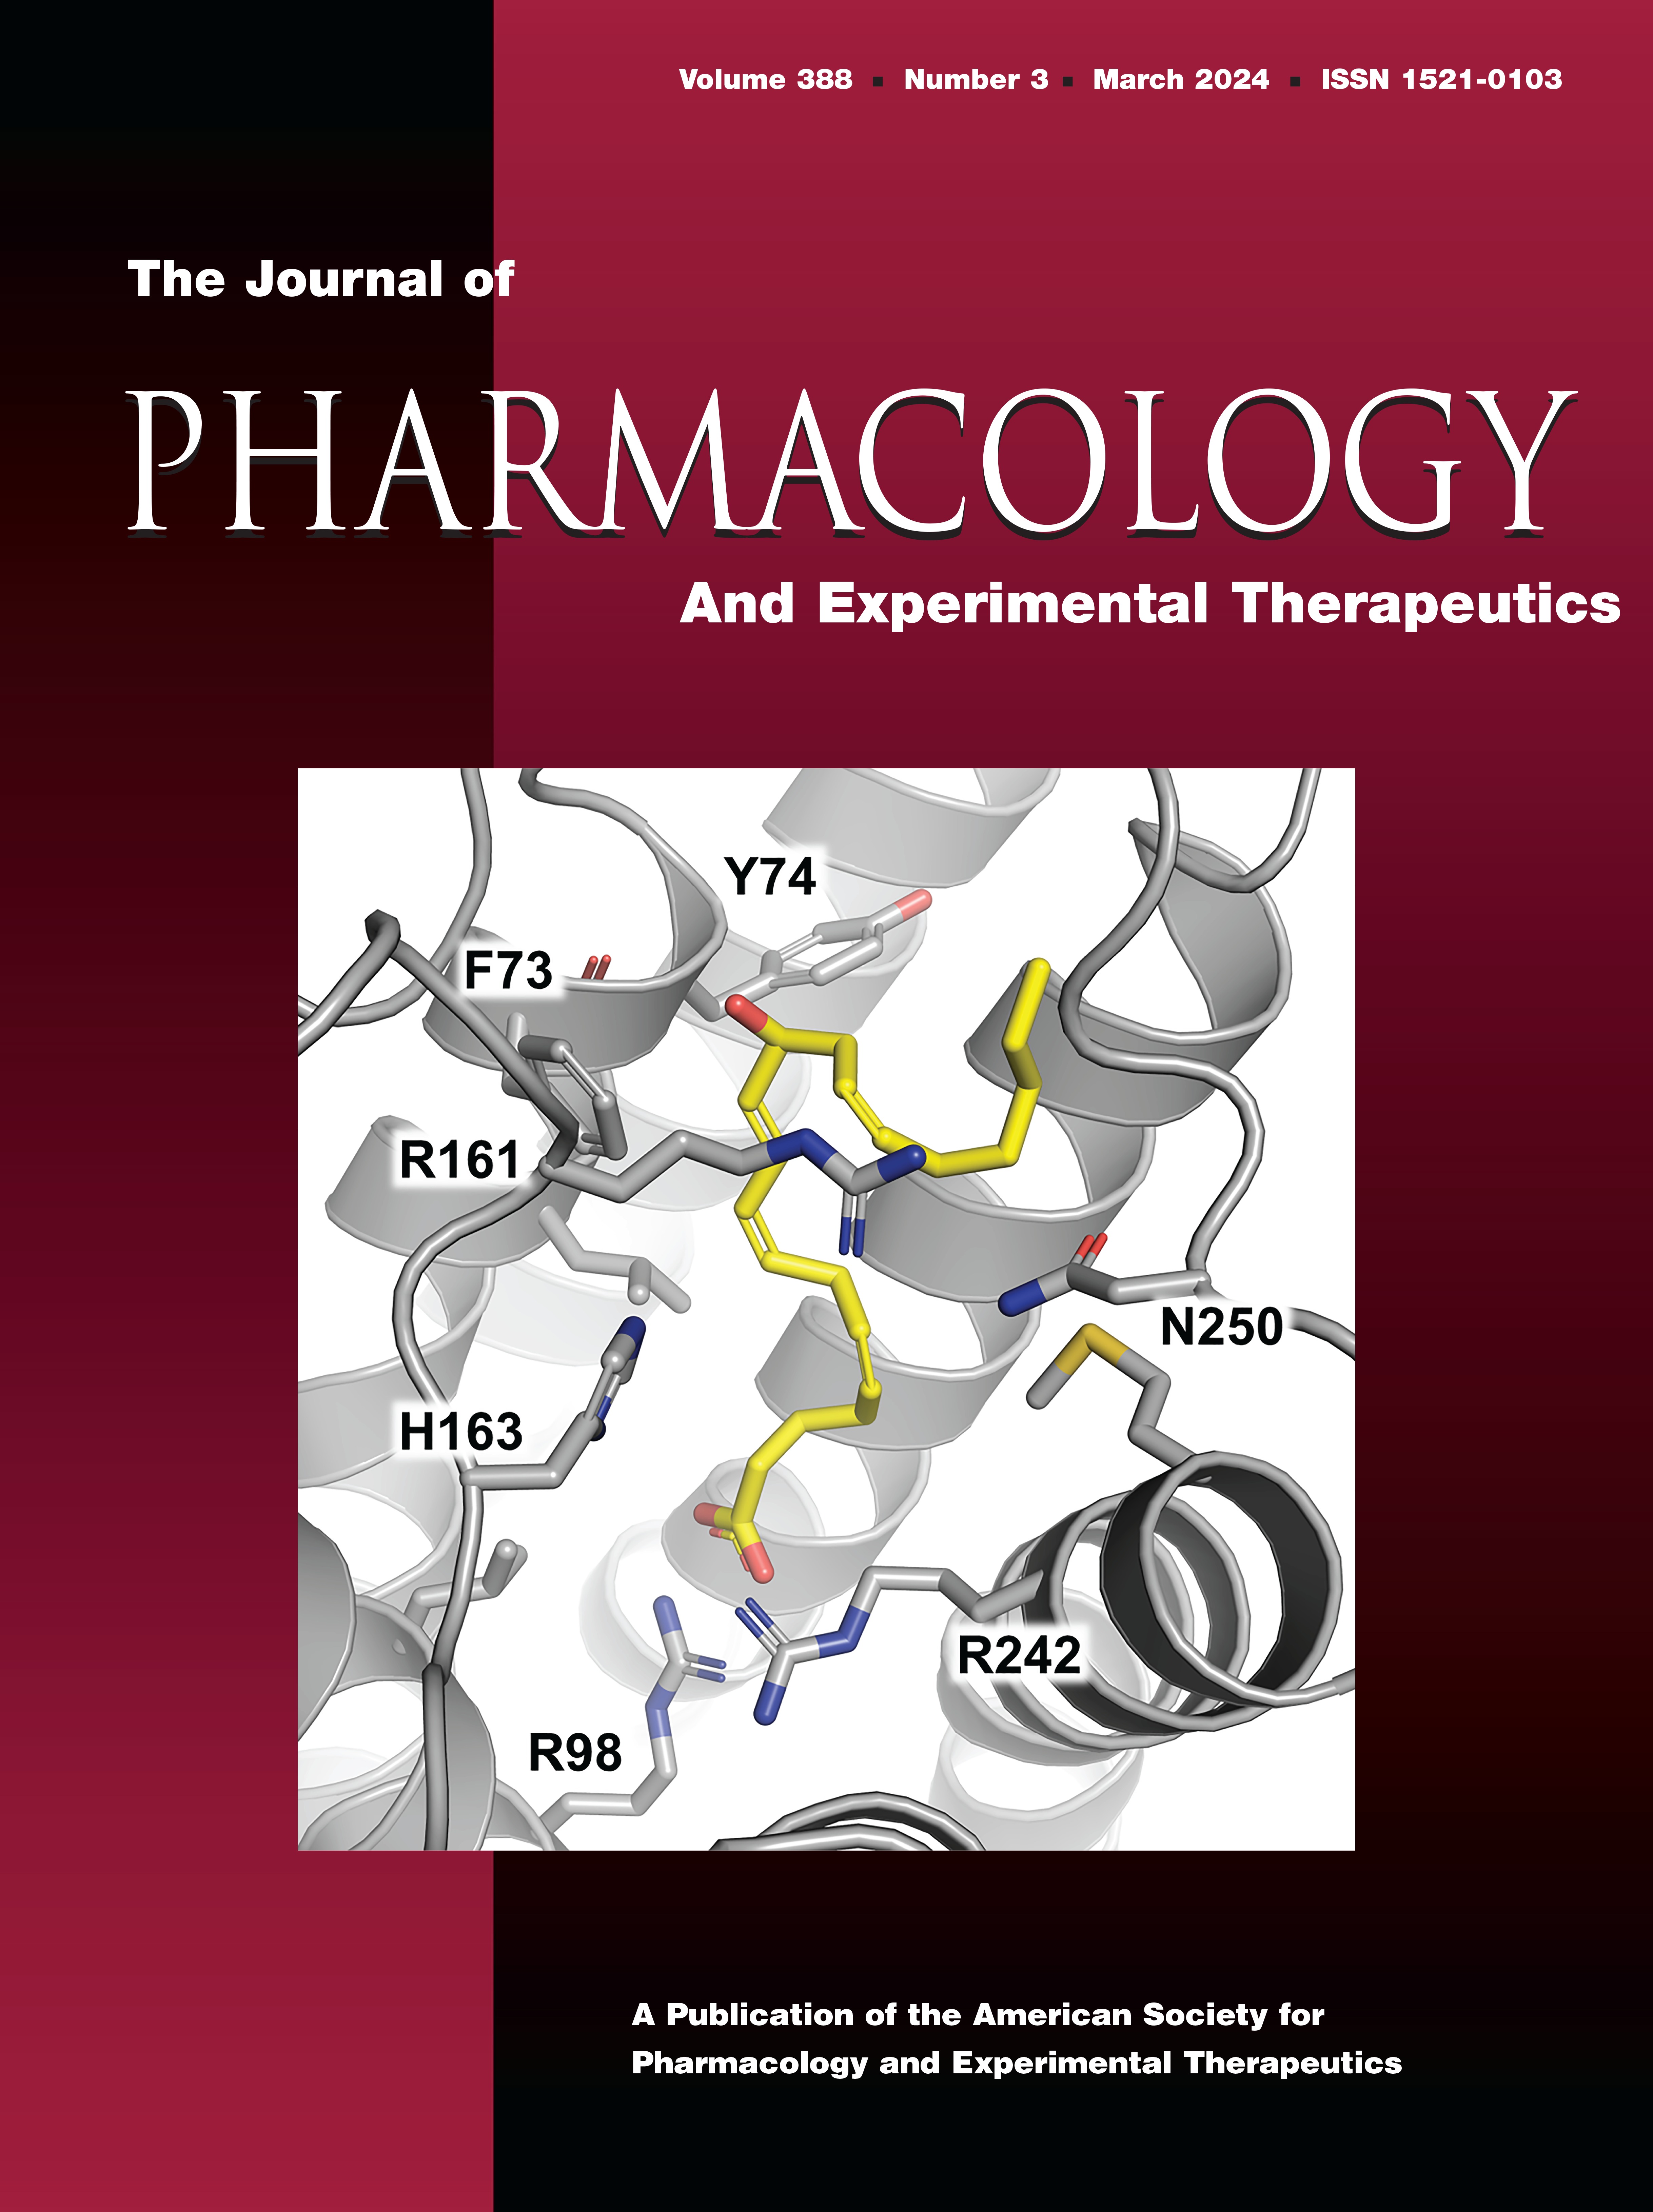 Anti-Inflammatory Effects of a Novel Nuclear Factor-{kappa}B Inhibitory Derivative Derived from Pyrazolo[3,4-d]Pyrimidine in Three Inflammation Models [Drug Discovery and Translational Medicine]